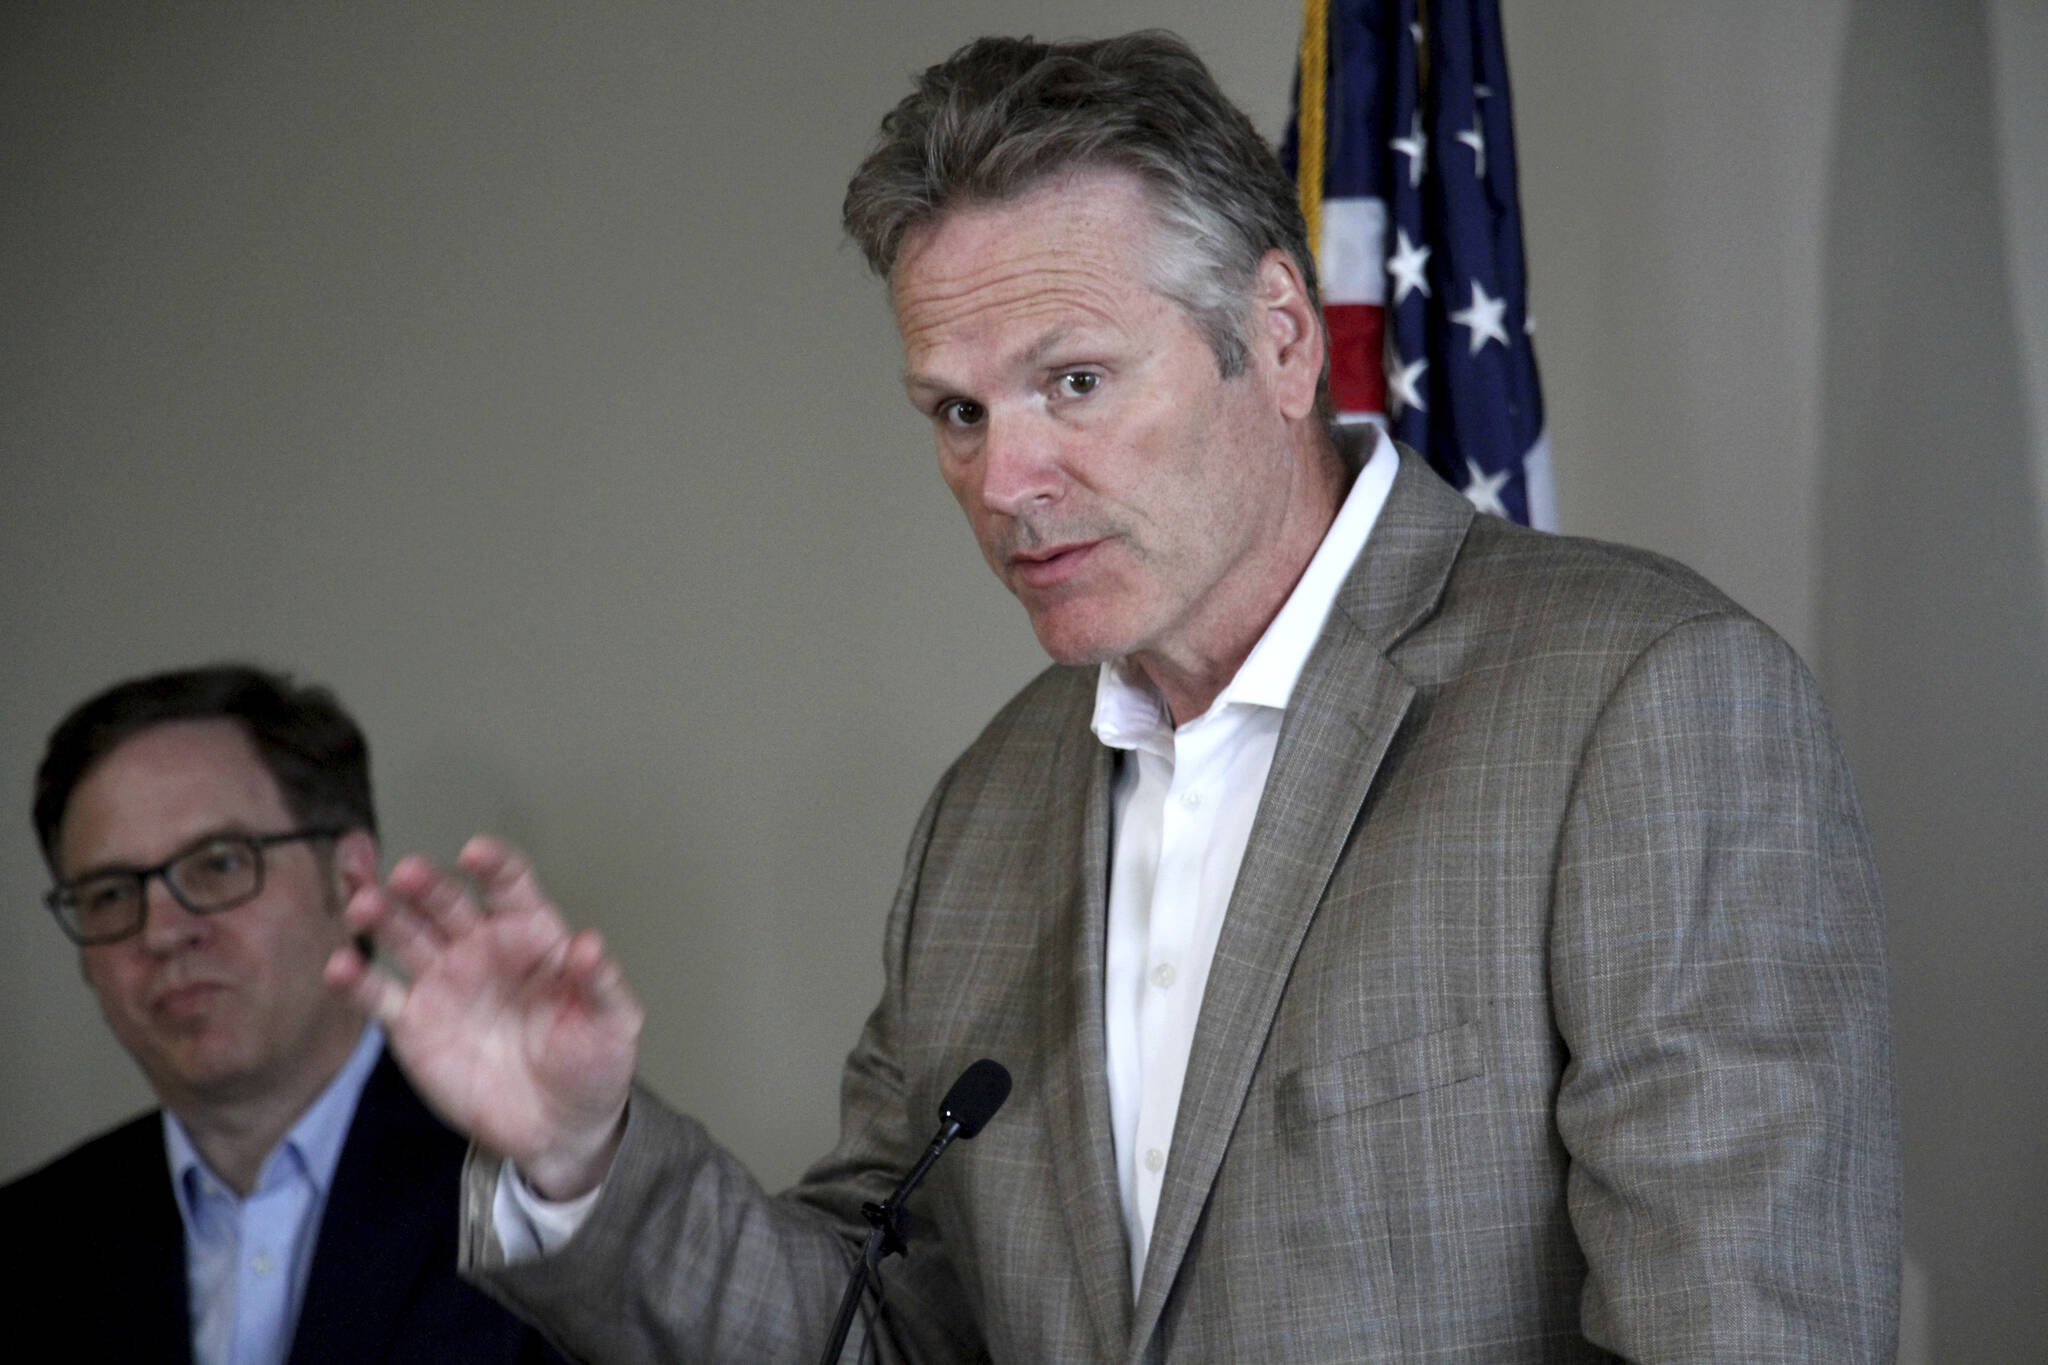 Alaska Gov. Mike Dunleavy, right, speaks during a news conference during a broadband summit in Anchorage, Alaska, Tuesday, Aug. 9, 2022. An investigation into a complaint alleging improper coordination between Dunleavy’s campaign and a third-party group that supports his reelection is not expected to be completed before the Nov. 8 election. (AP Photo/Mark Thiessen,File)